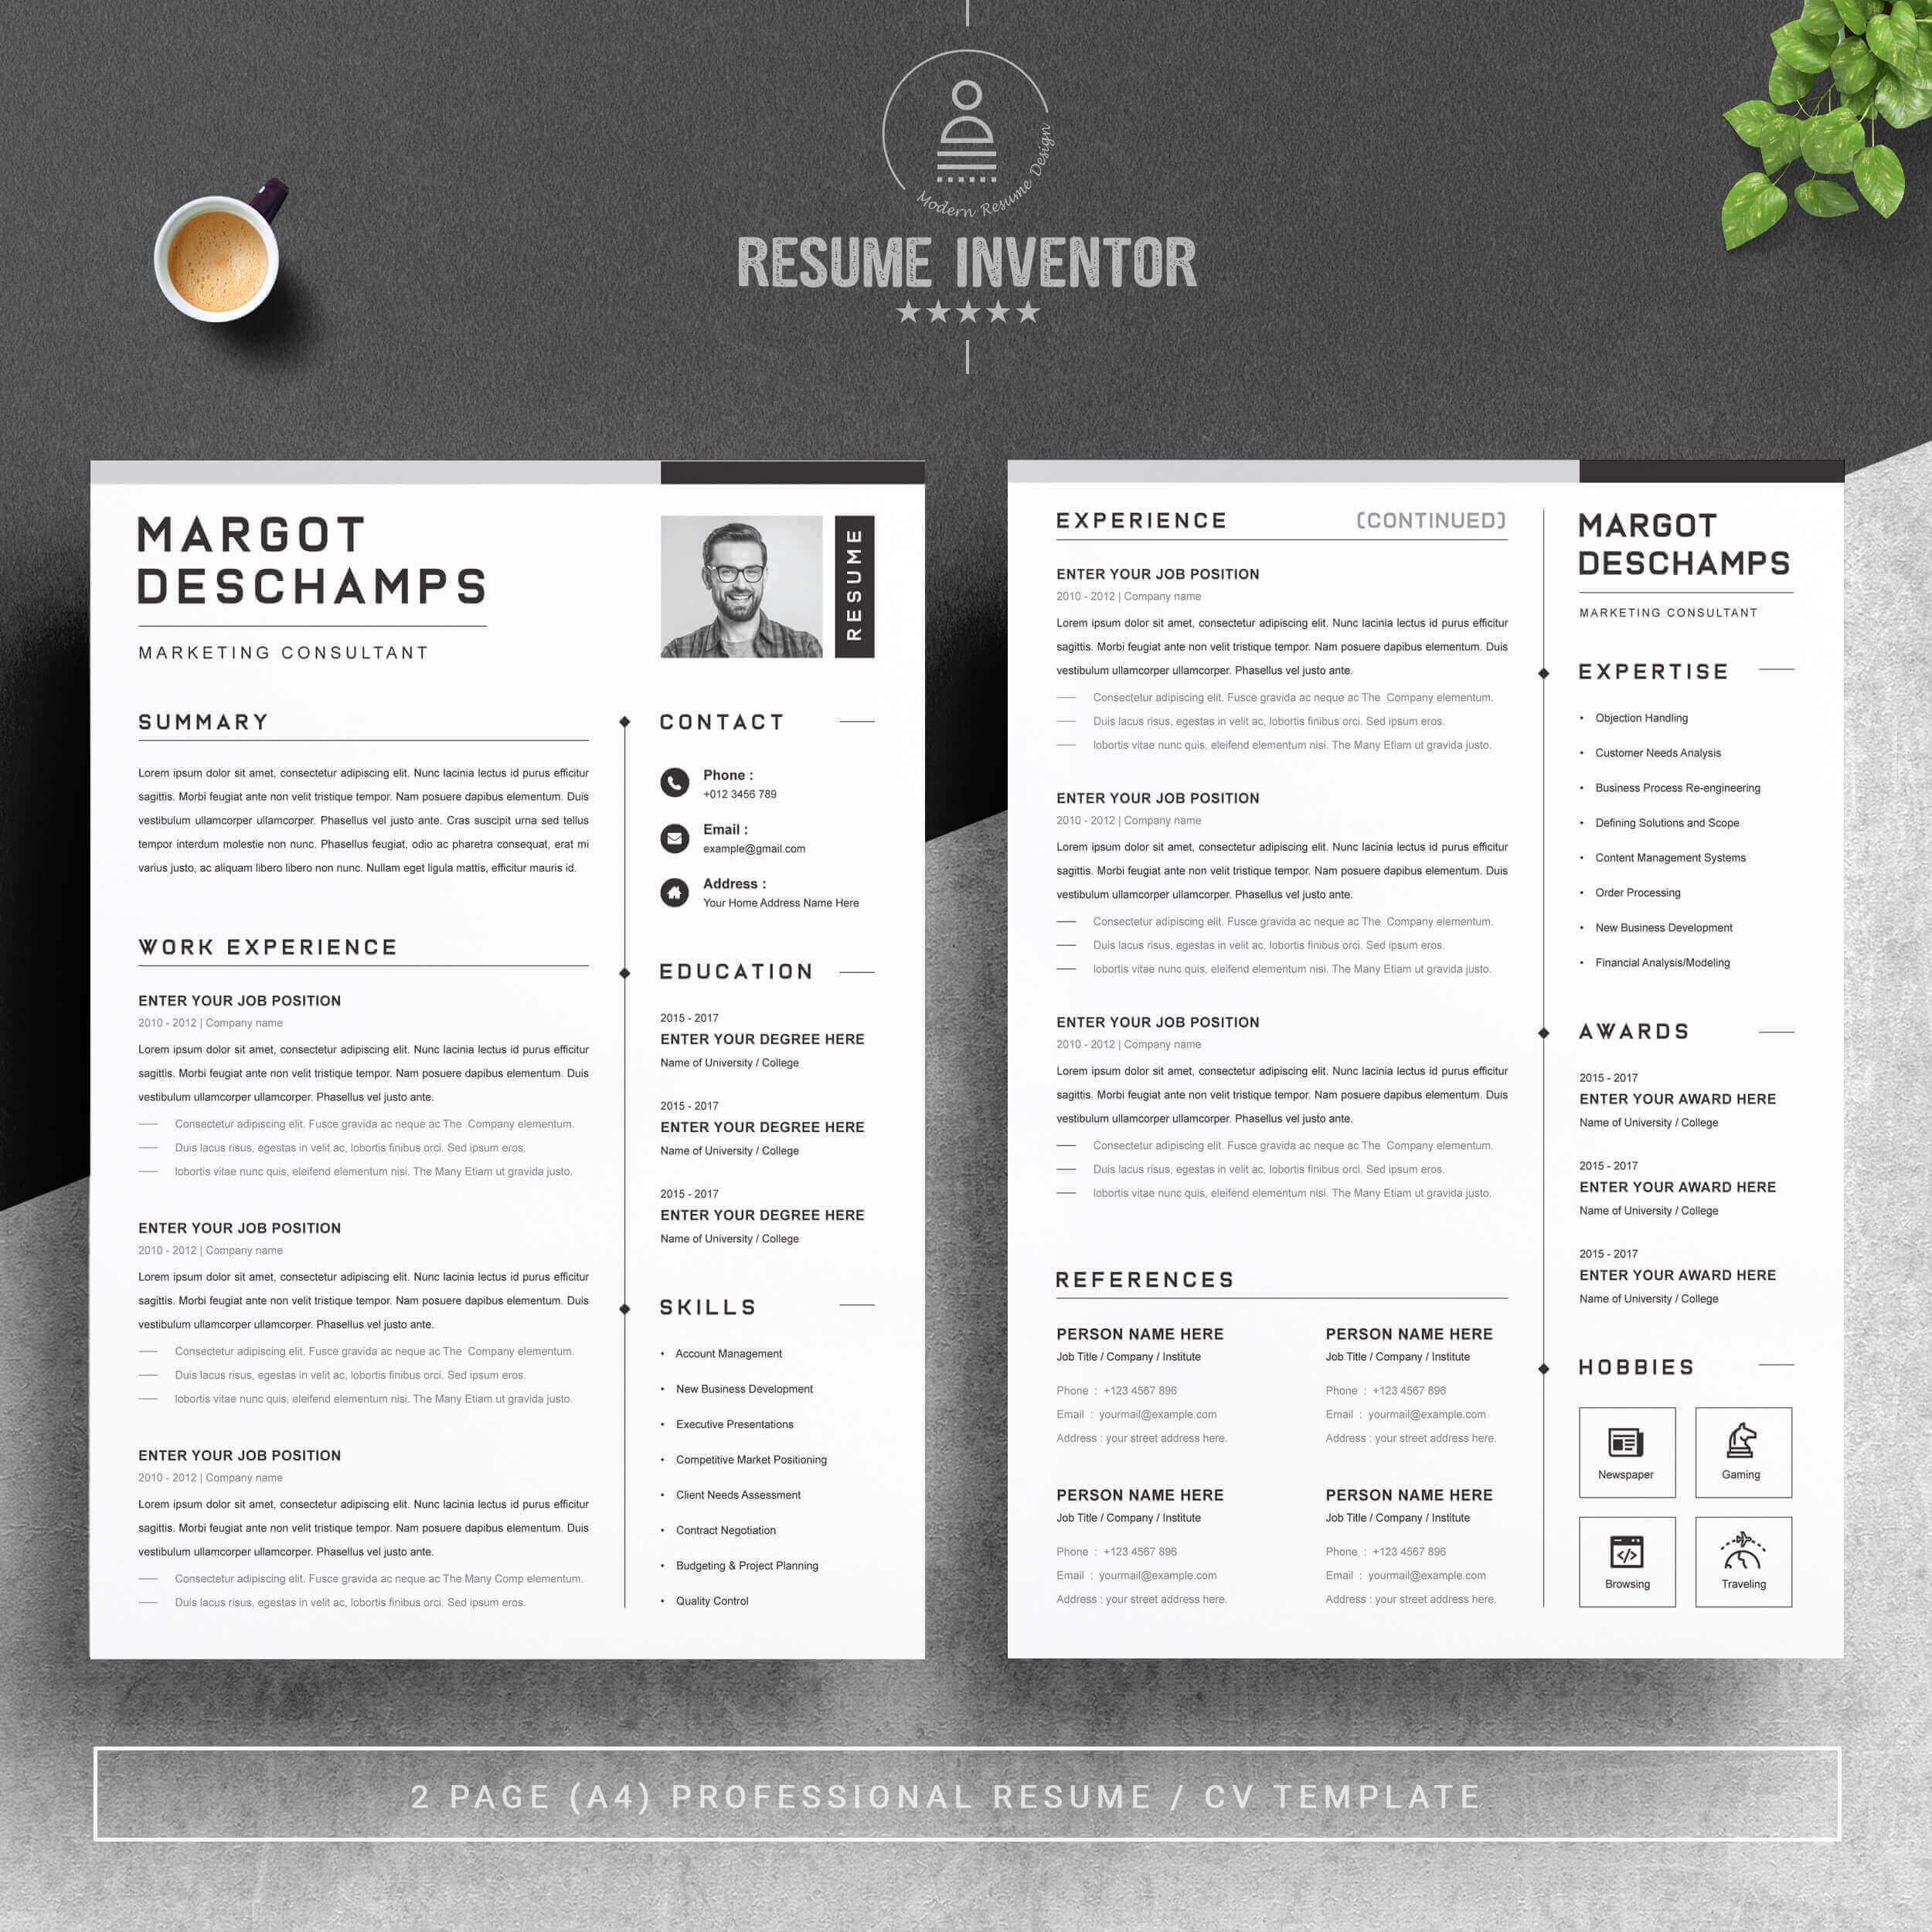 Marketing Consultant Resume Template | CV Template preview image.